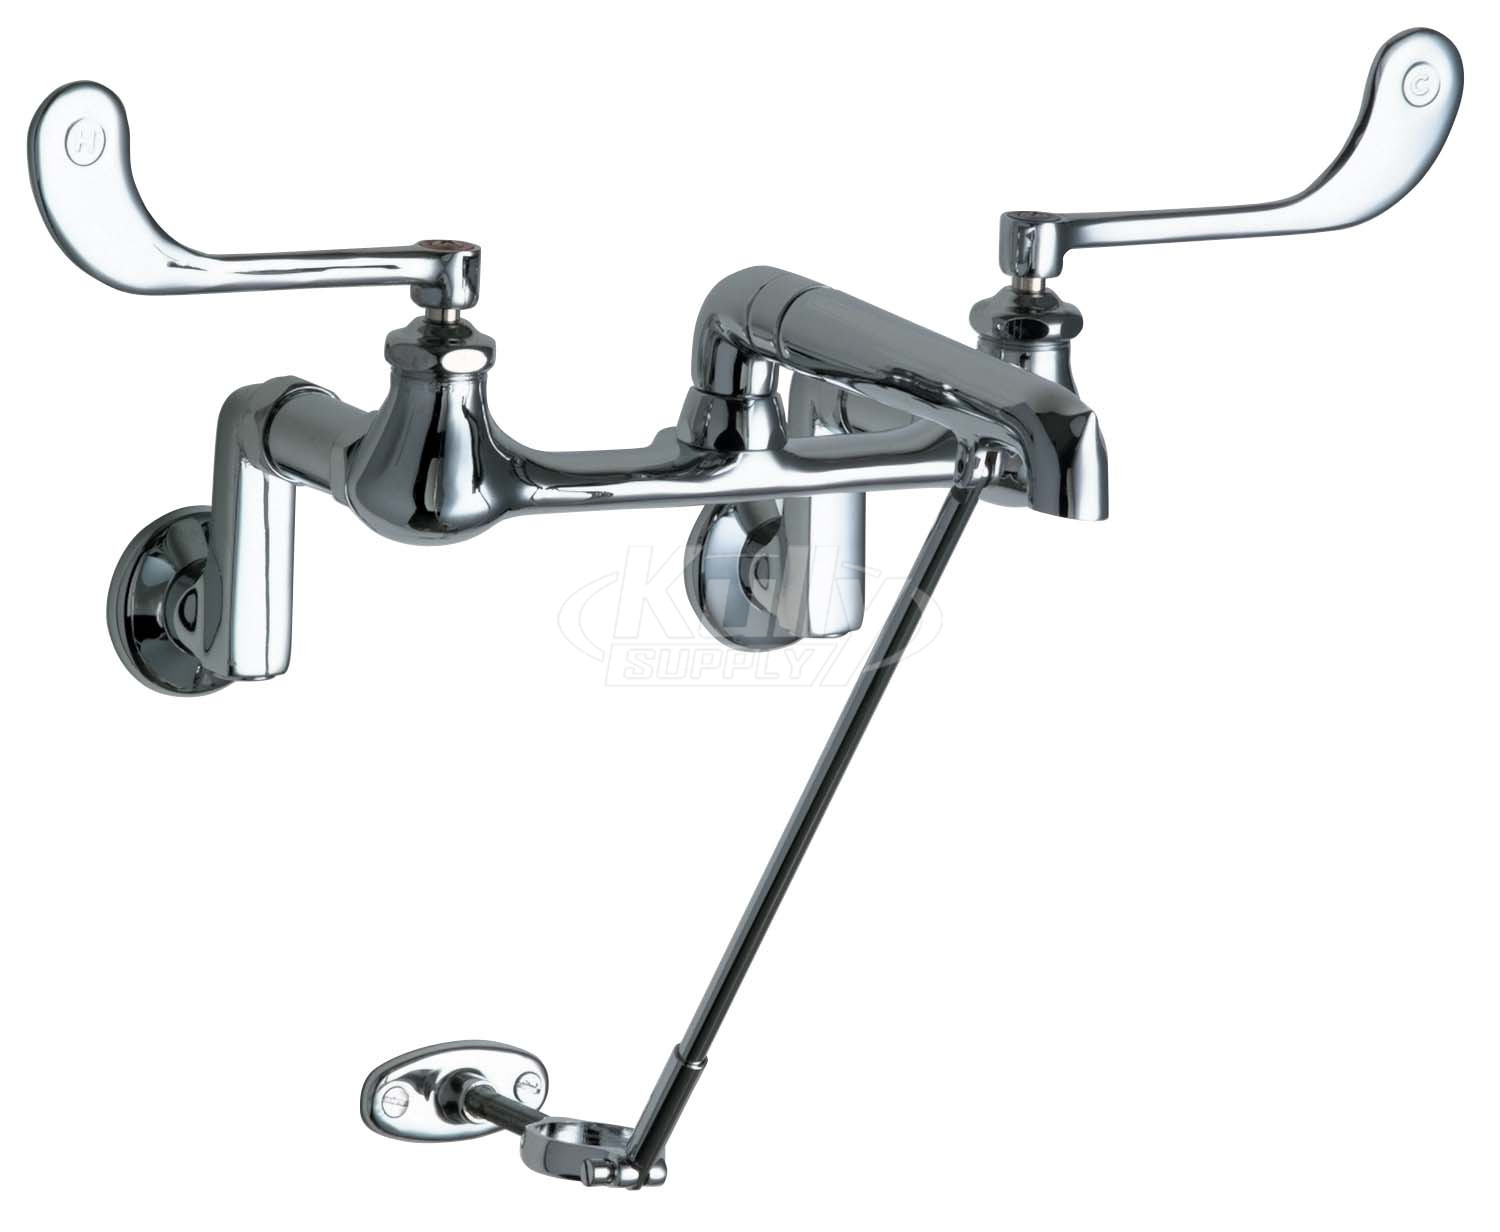 Chicago 814-XKCP Wall Mount Faucet